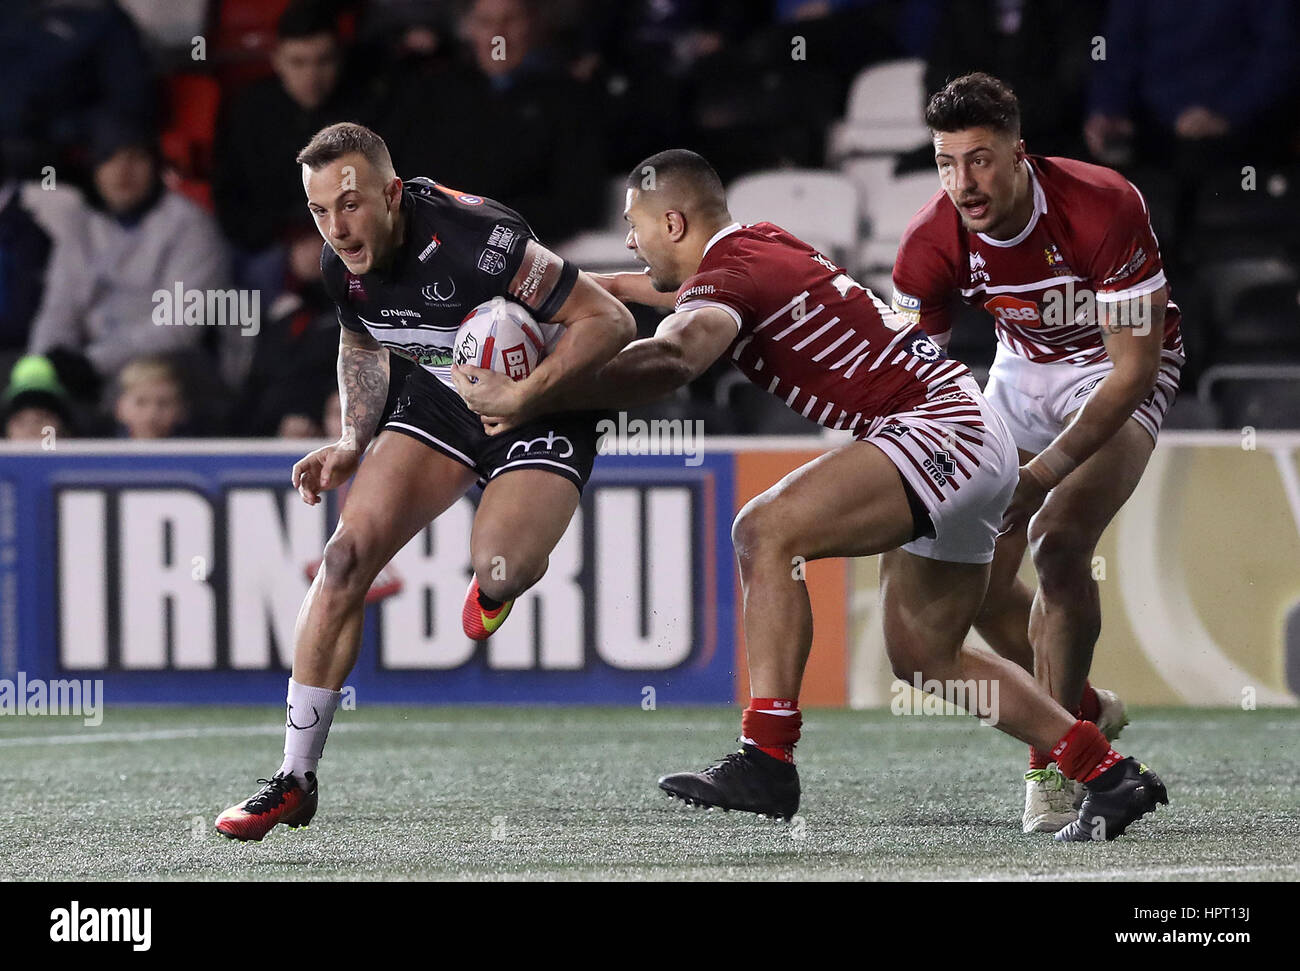 Widnes Vikings Danny Craven is tackled by Wigan Warriors Willie Isa during the Super League match at the Select Security Stadium, Widnes. Stock Photo